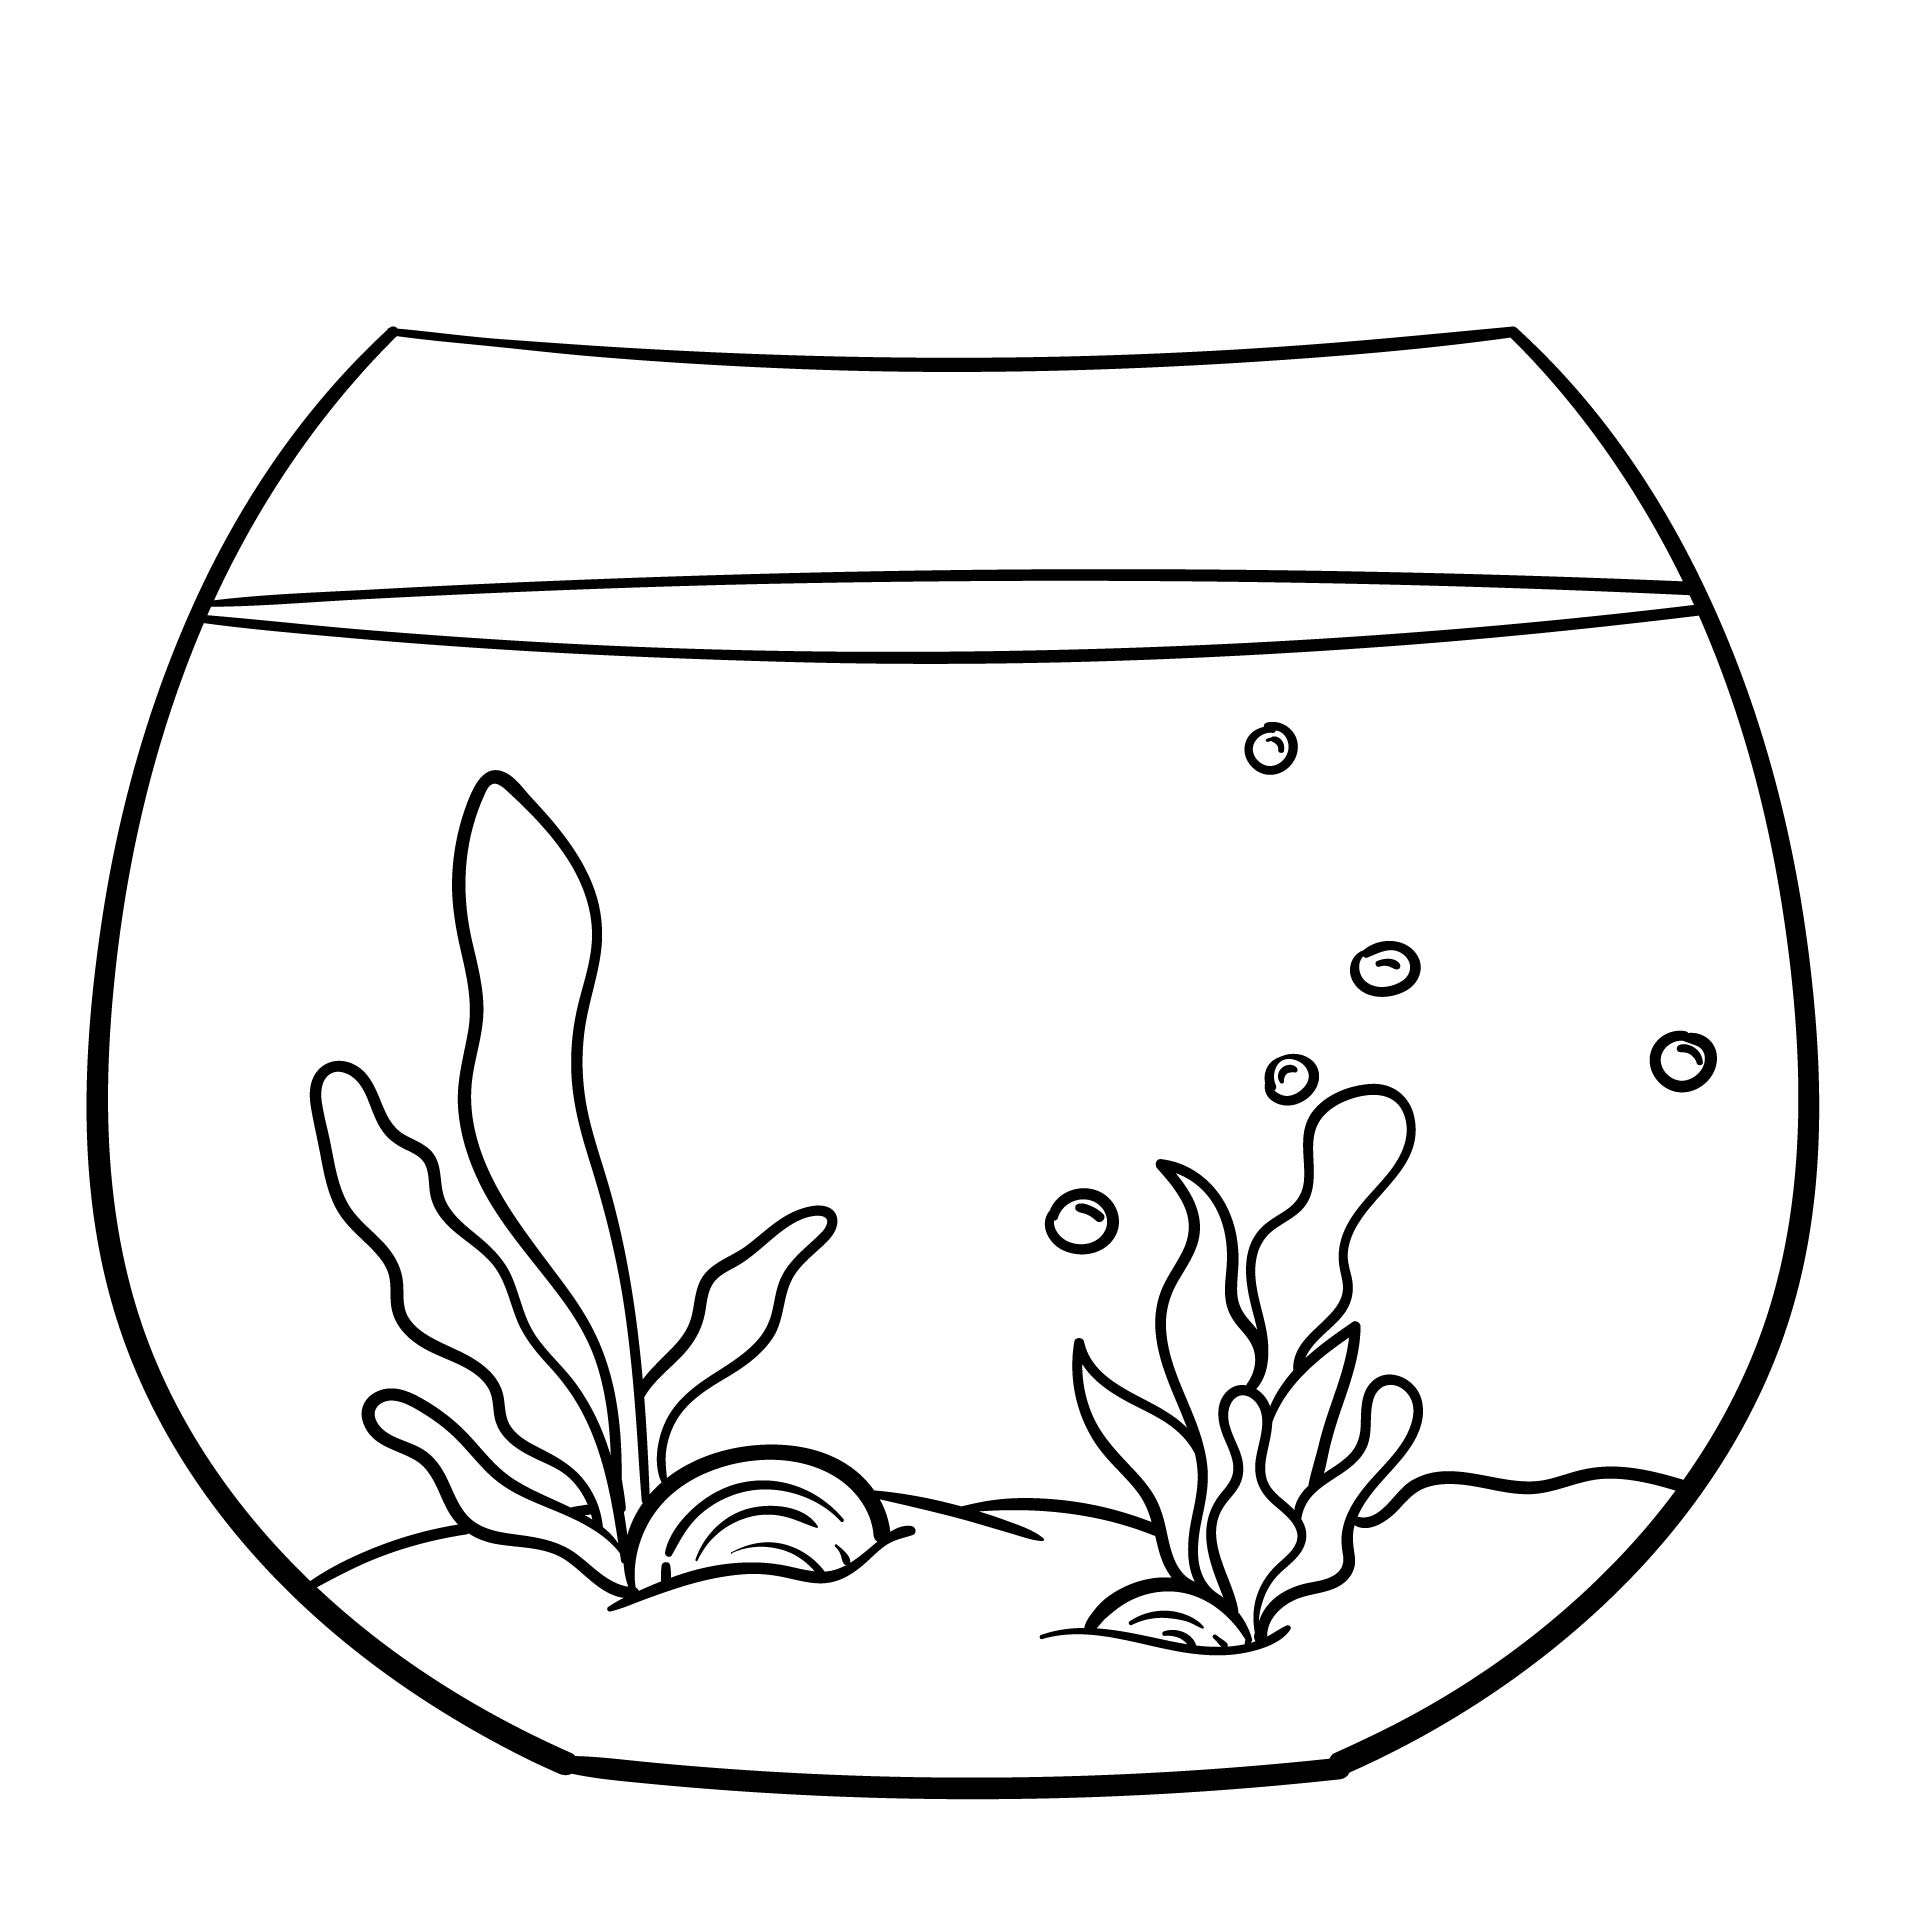 6 Best Images of Fish Bowl Template Printable Fish Bowl Template